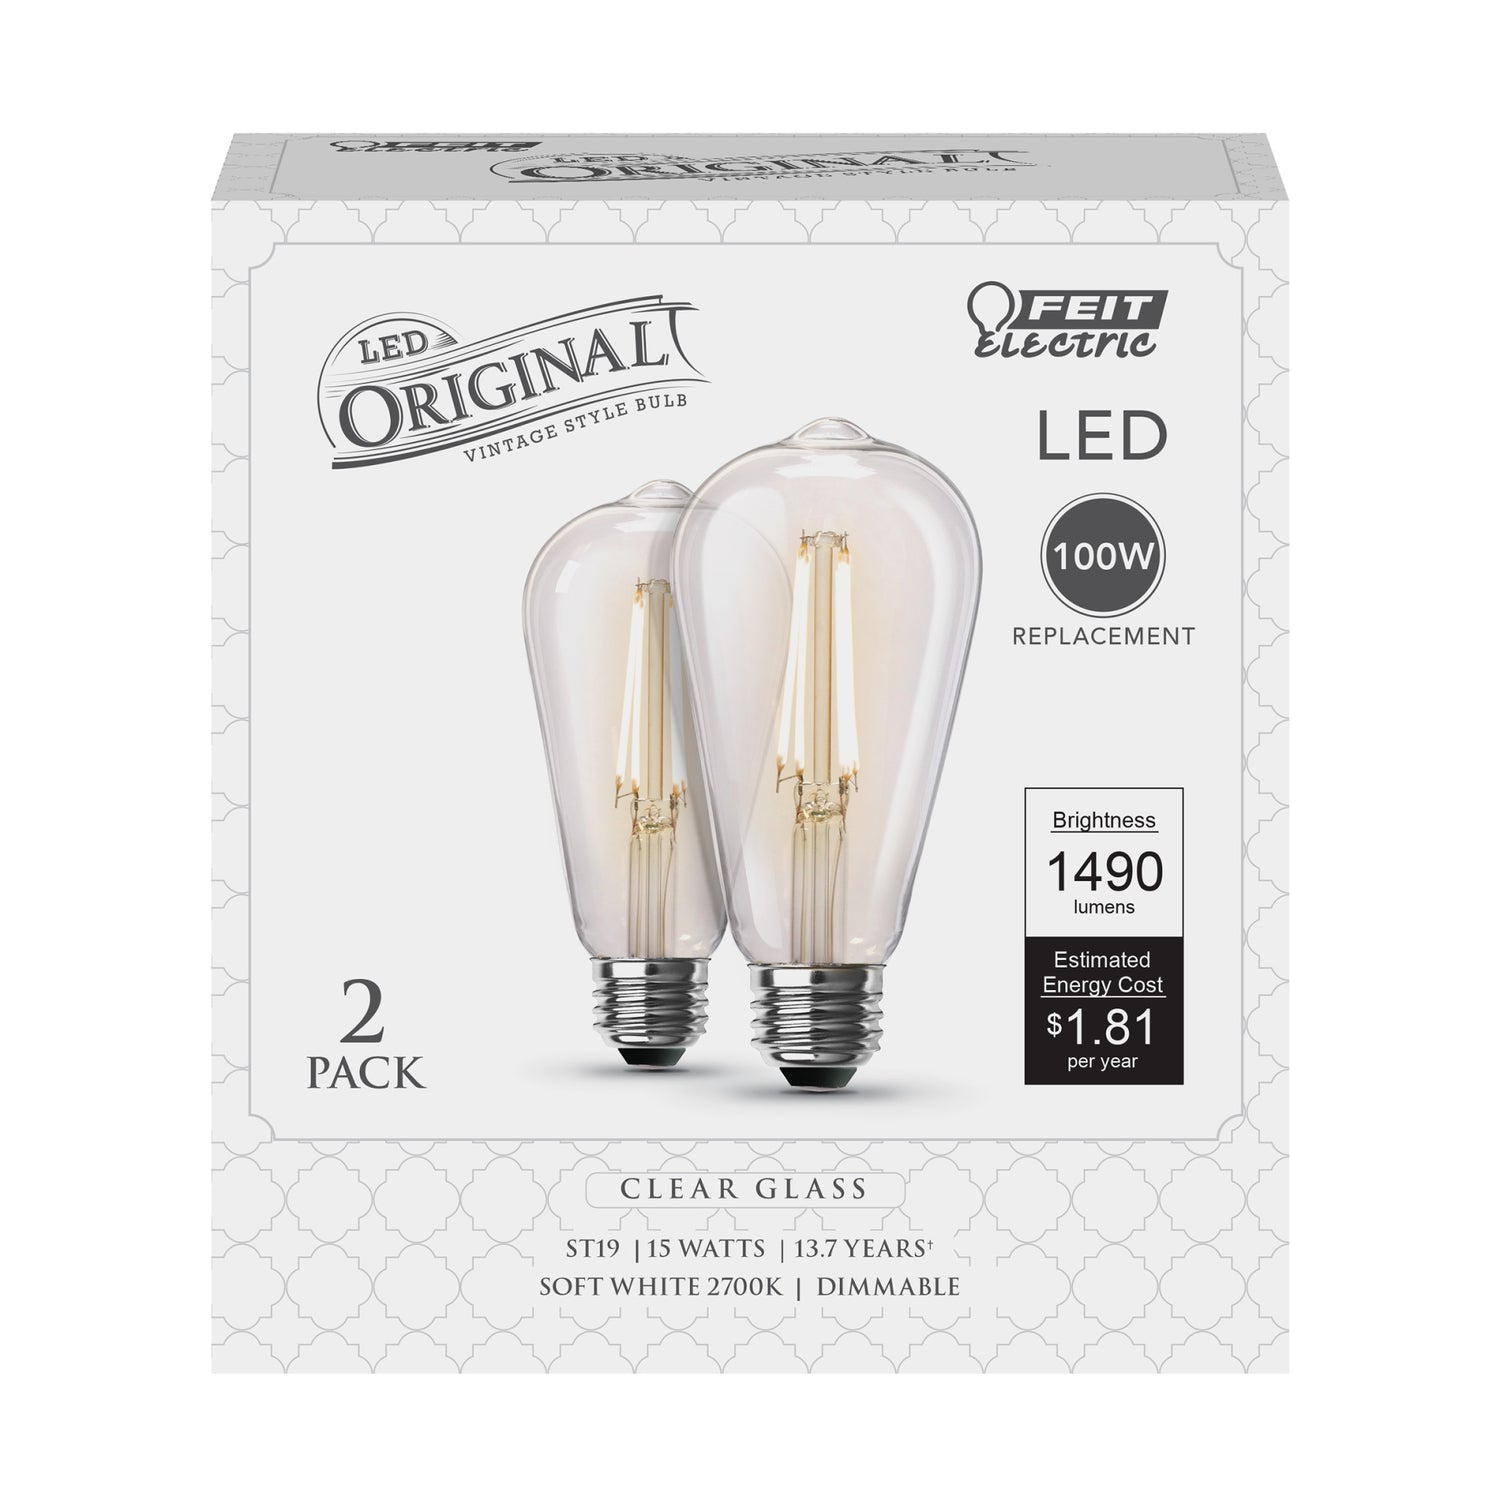 15W (100W Replacement) ST19 E26 Dimmable Straight Filament Clear Glass Vintage Edison LED Light Bulb, Soft White (2-Pack)